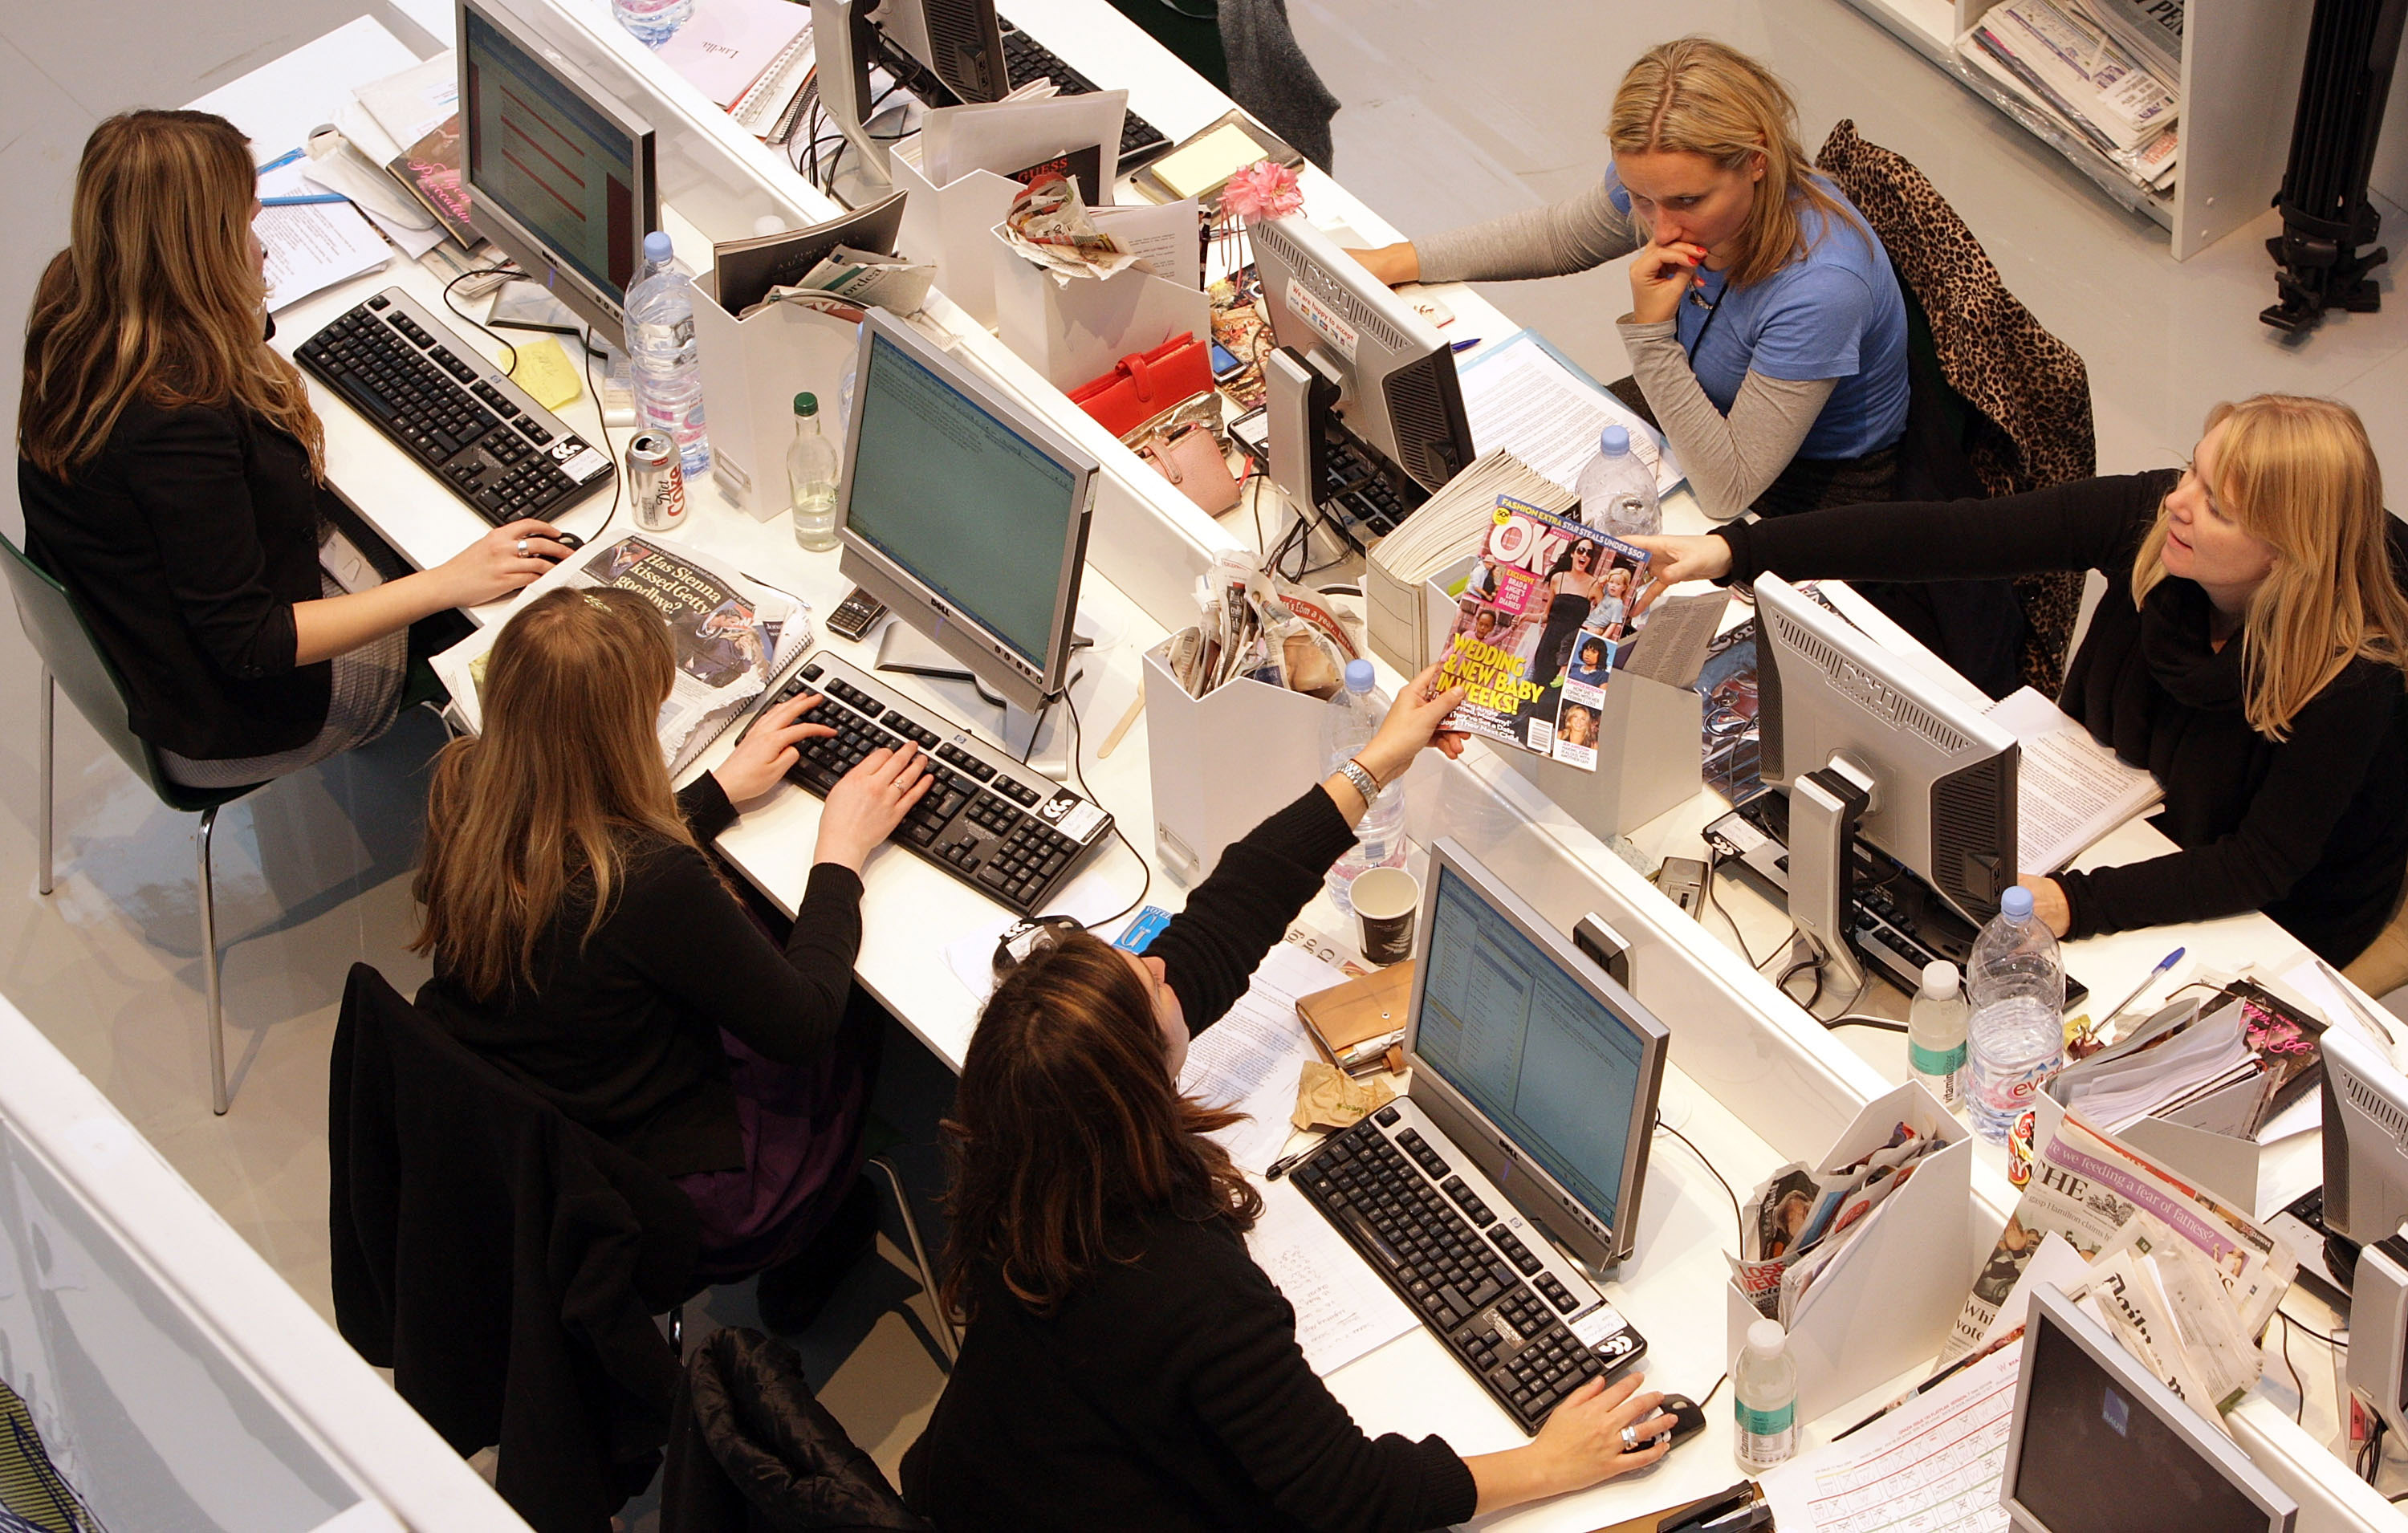 Production staff on the weekly fashion magazine, Grazia edit the magazine in a temporary office inside the Westfield shopping centre on November 3, 2008 in London. (Oli Scarff—Getty Images)